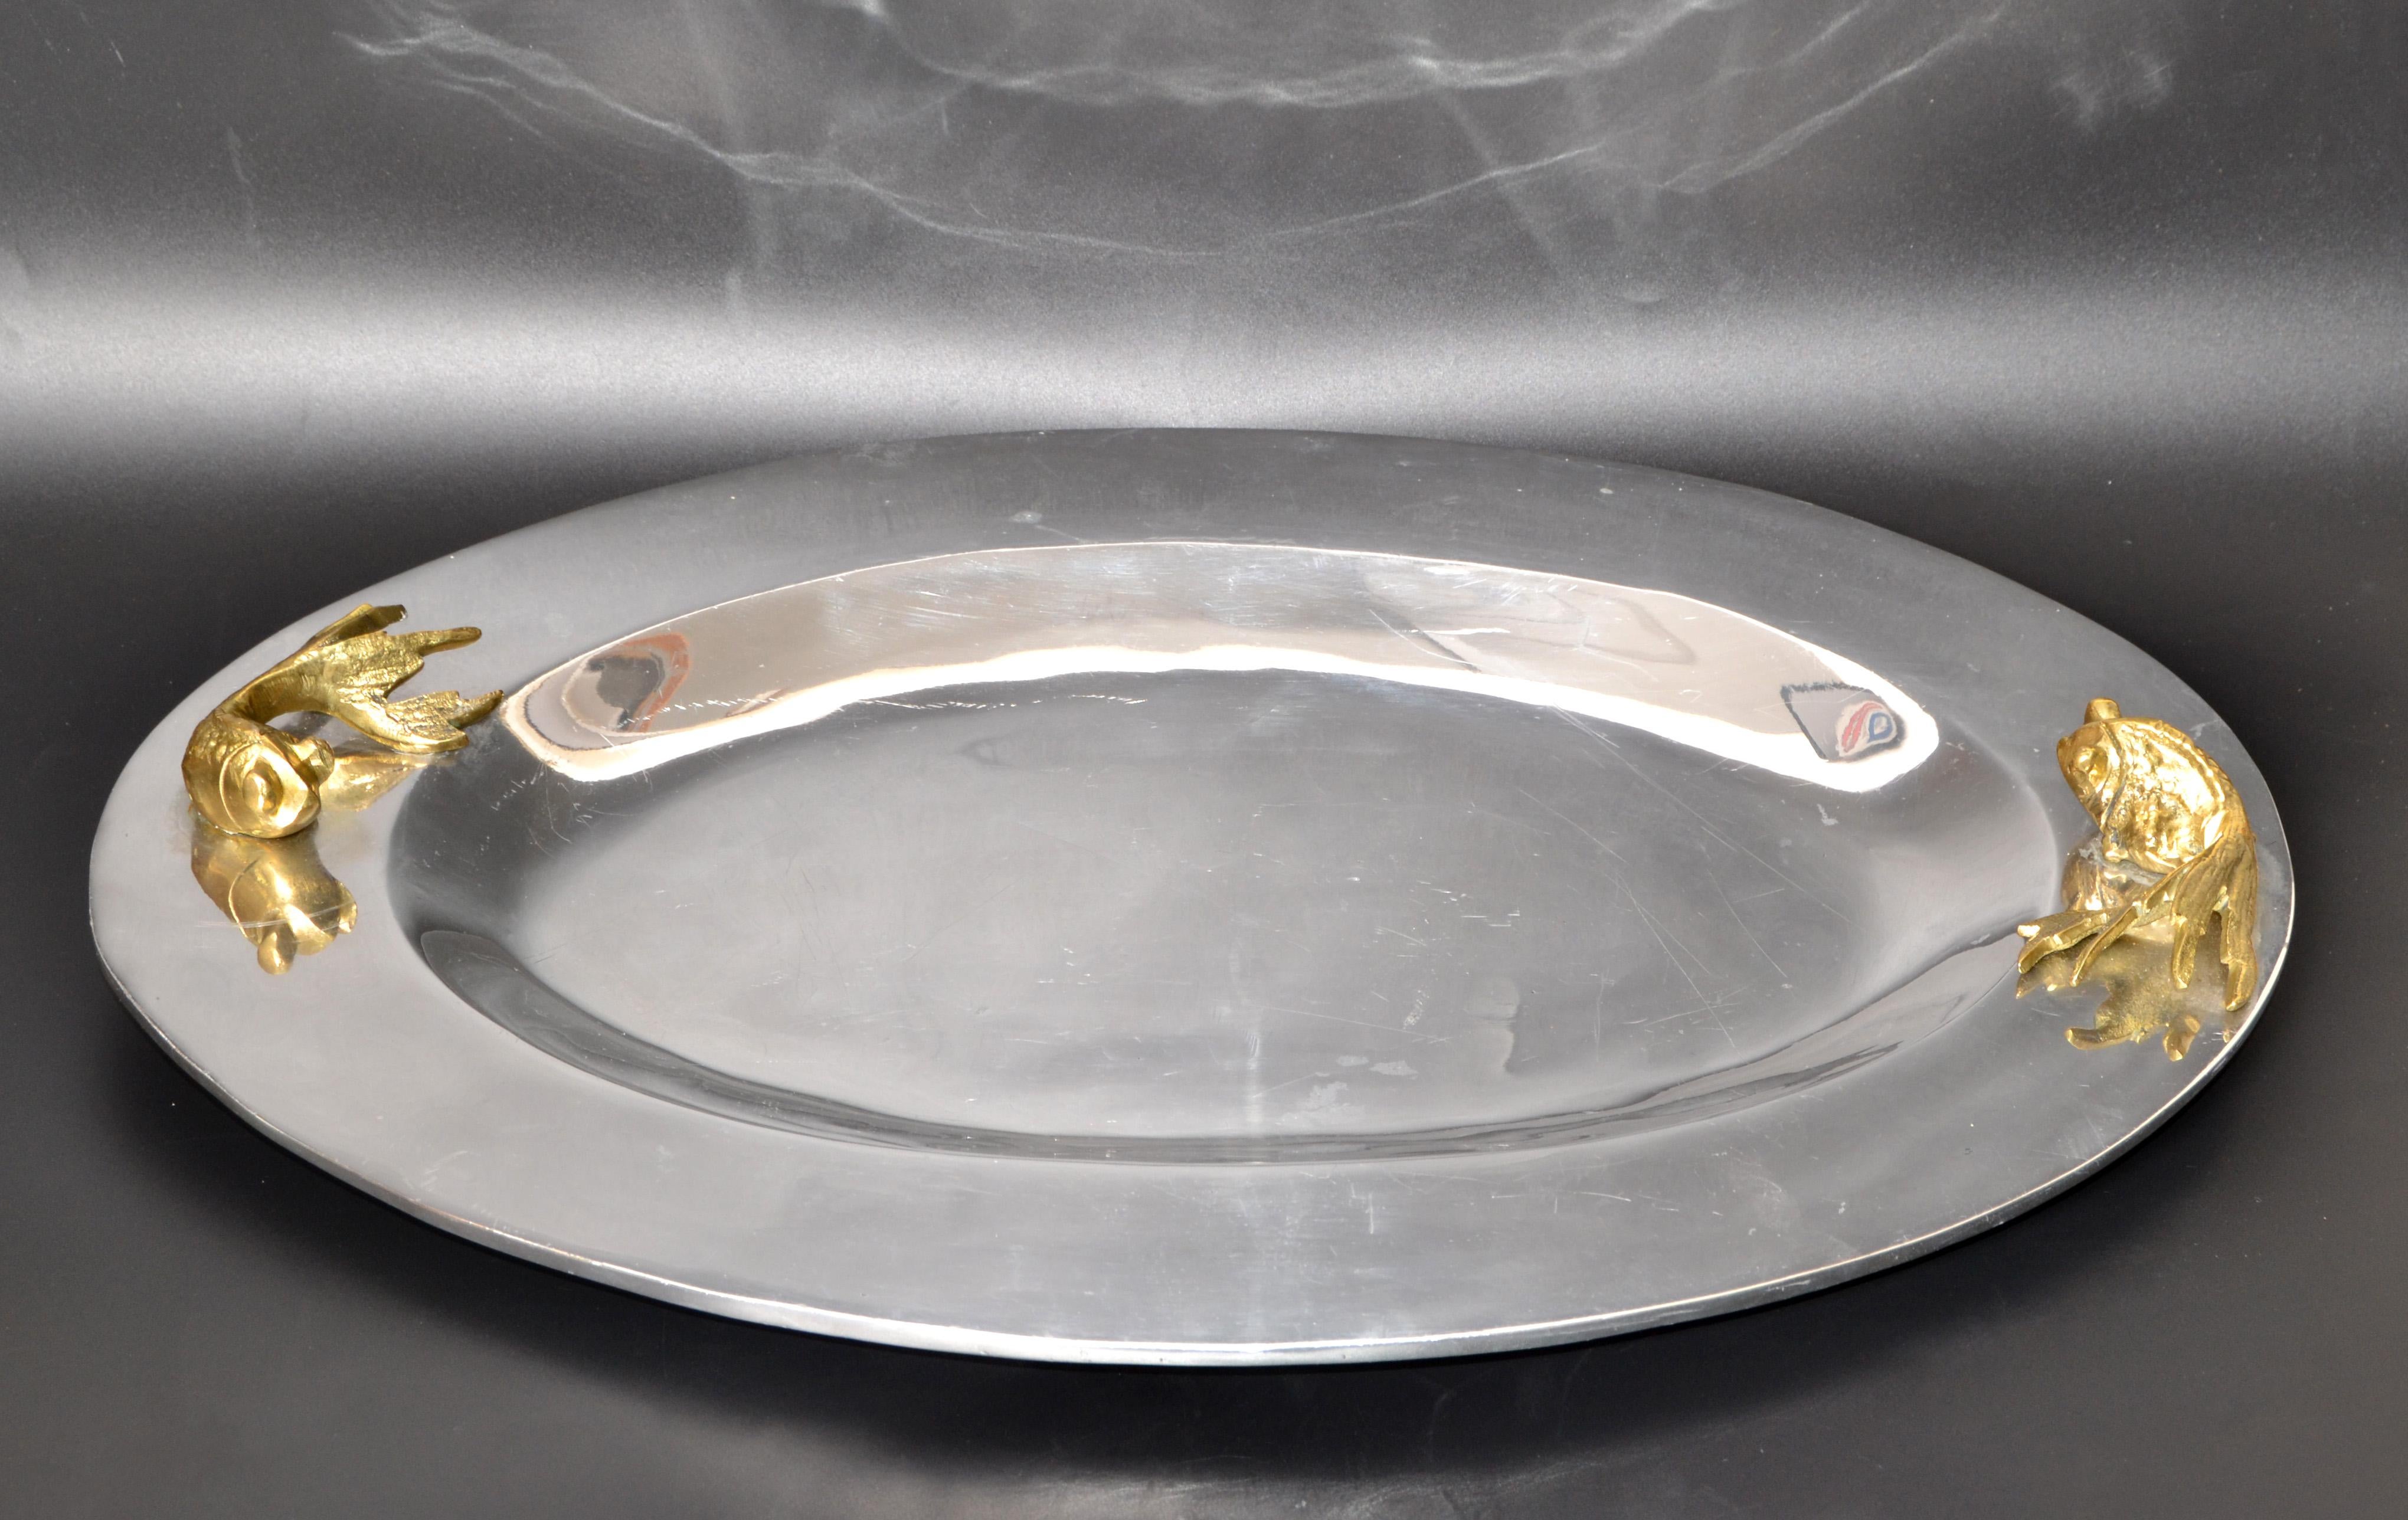 Oval Serving Tray Platter Bronze Fish Handles and Chrome Finish Art Deco Style For Sale 2